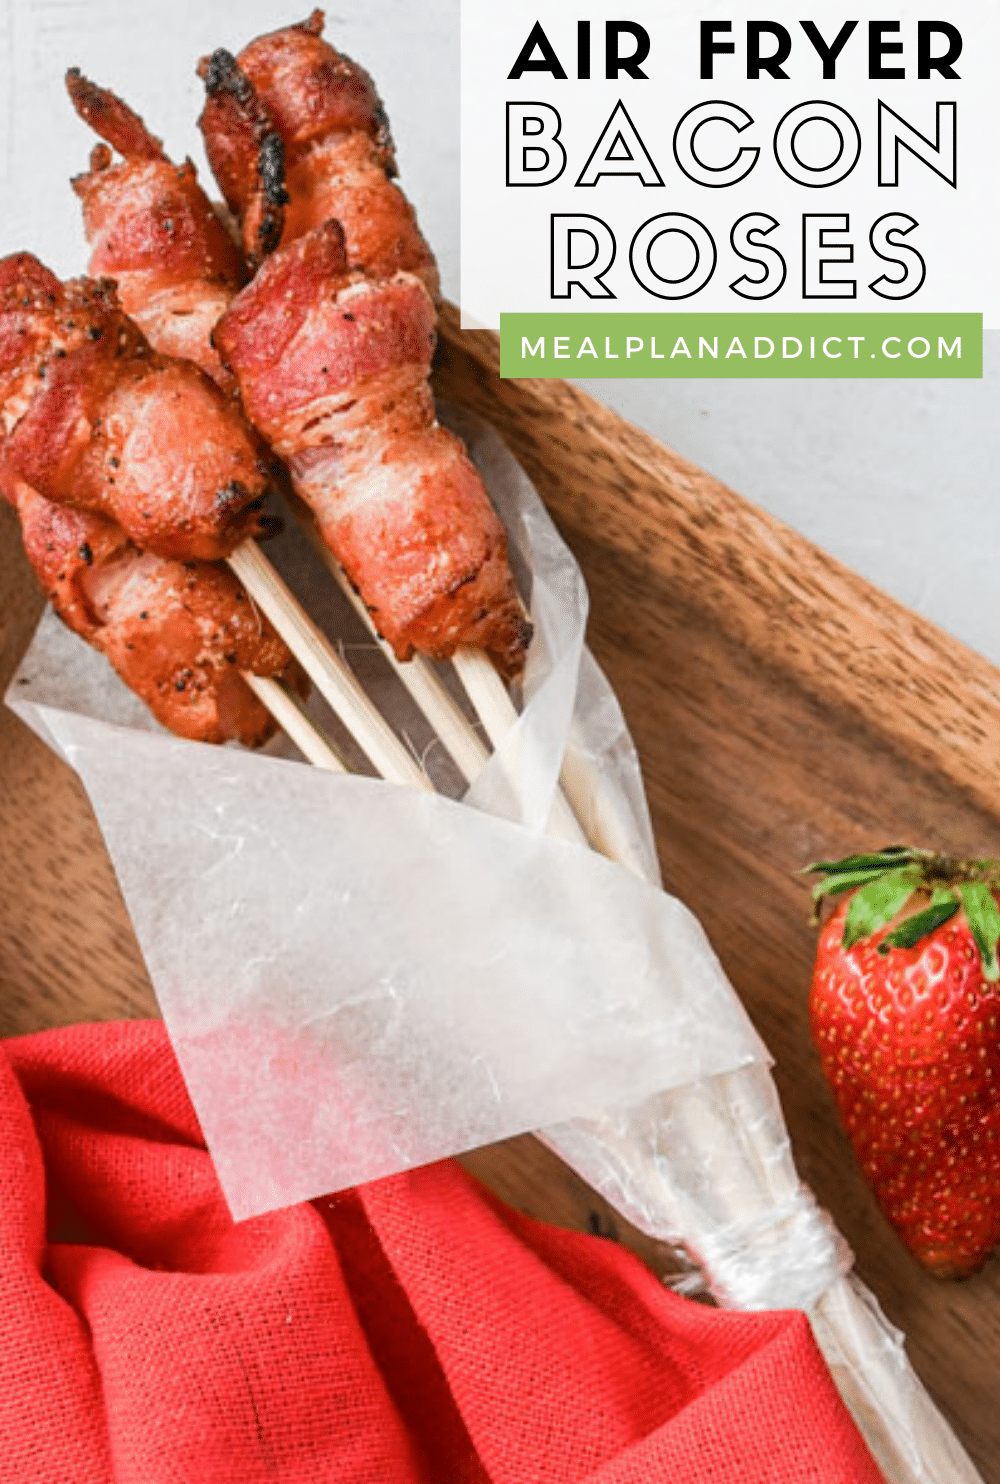 Bacon roses for valentines day